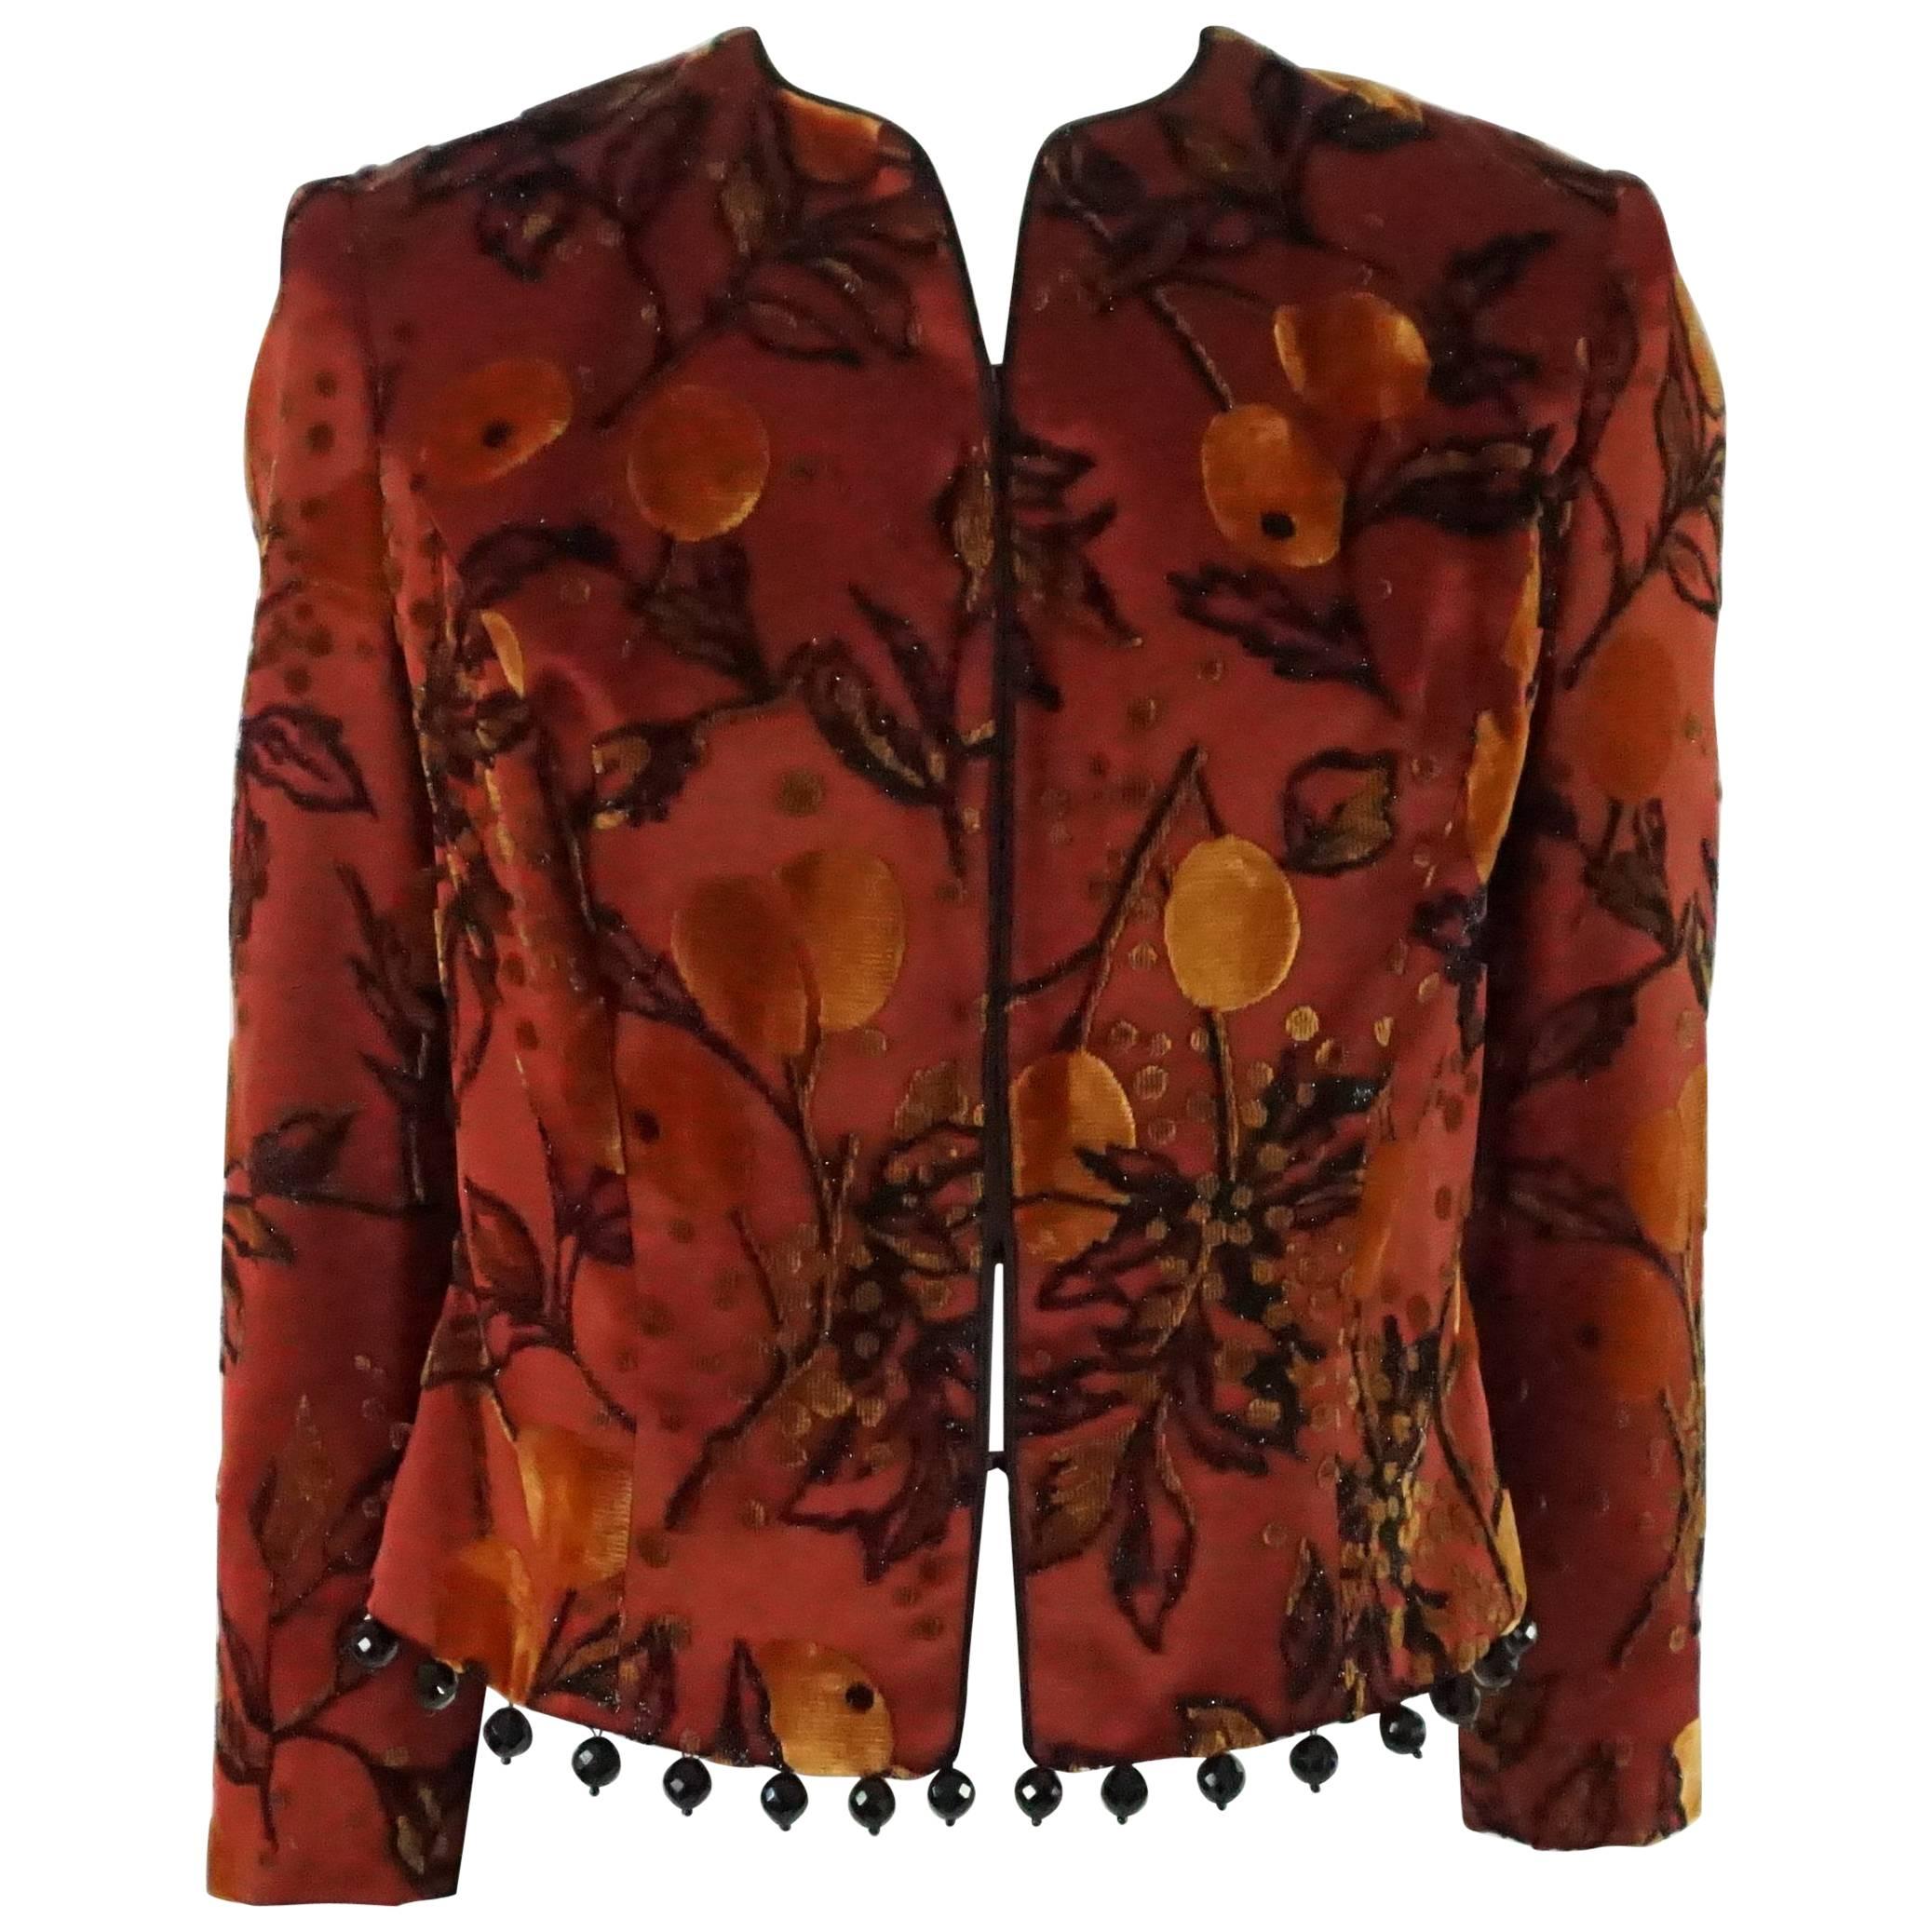 Joanna Mastroianni Red Cut Velvet Jacket with Hanging Beads - S